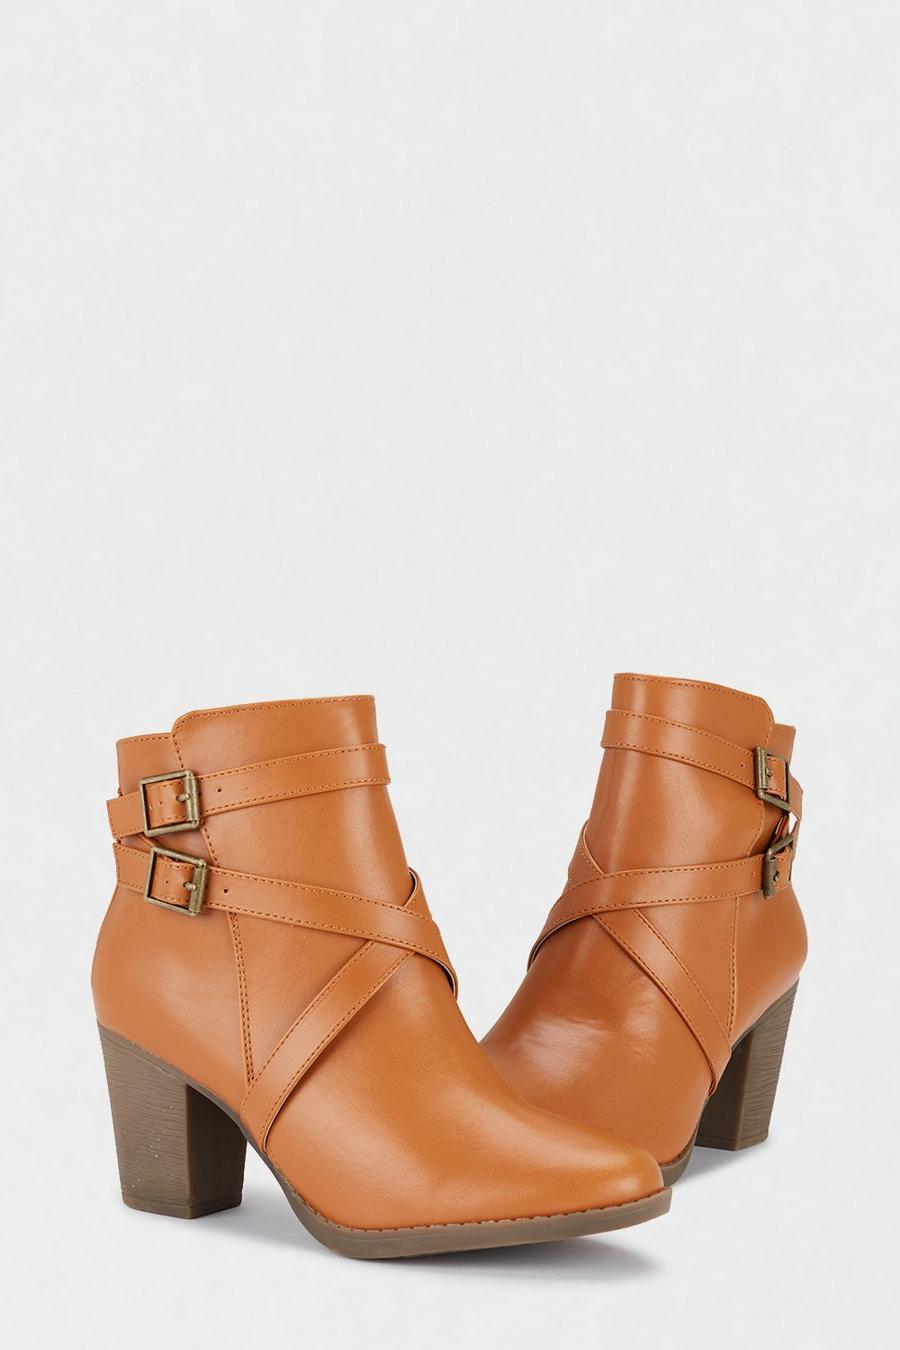 Alisha Cross Over Strap Ankle Boots